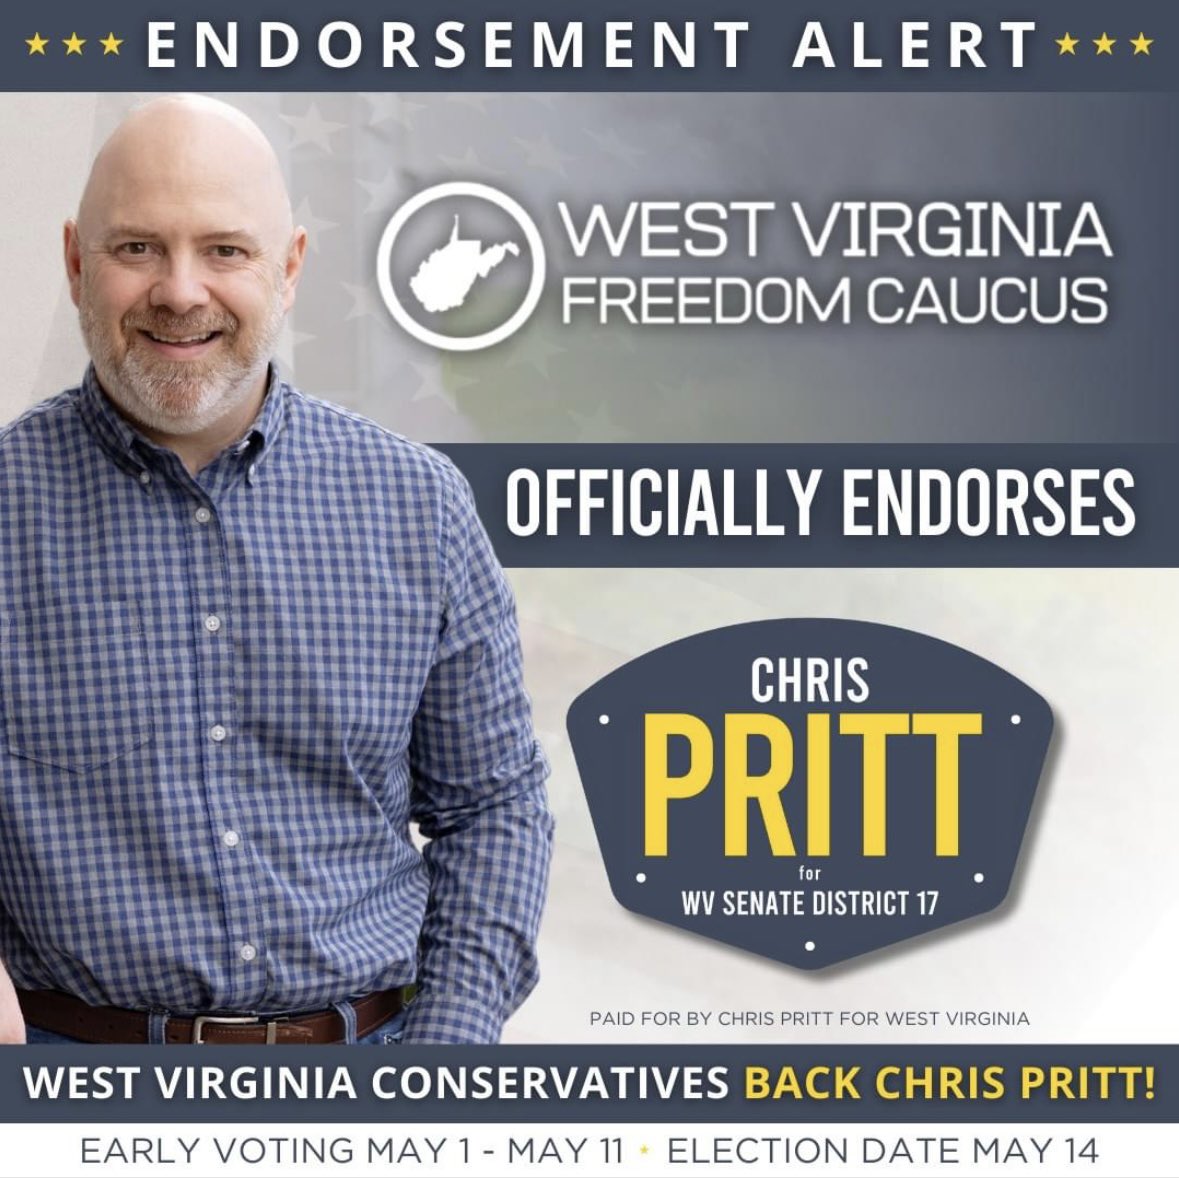 Proud to announce that the West Virginia Freedom Caucus has officially endorsed my candidacy for State Senate! #wvpol